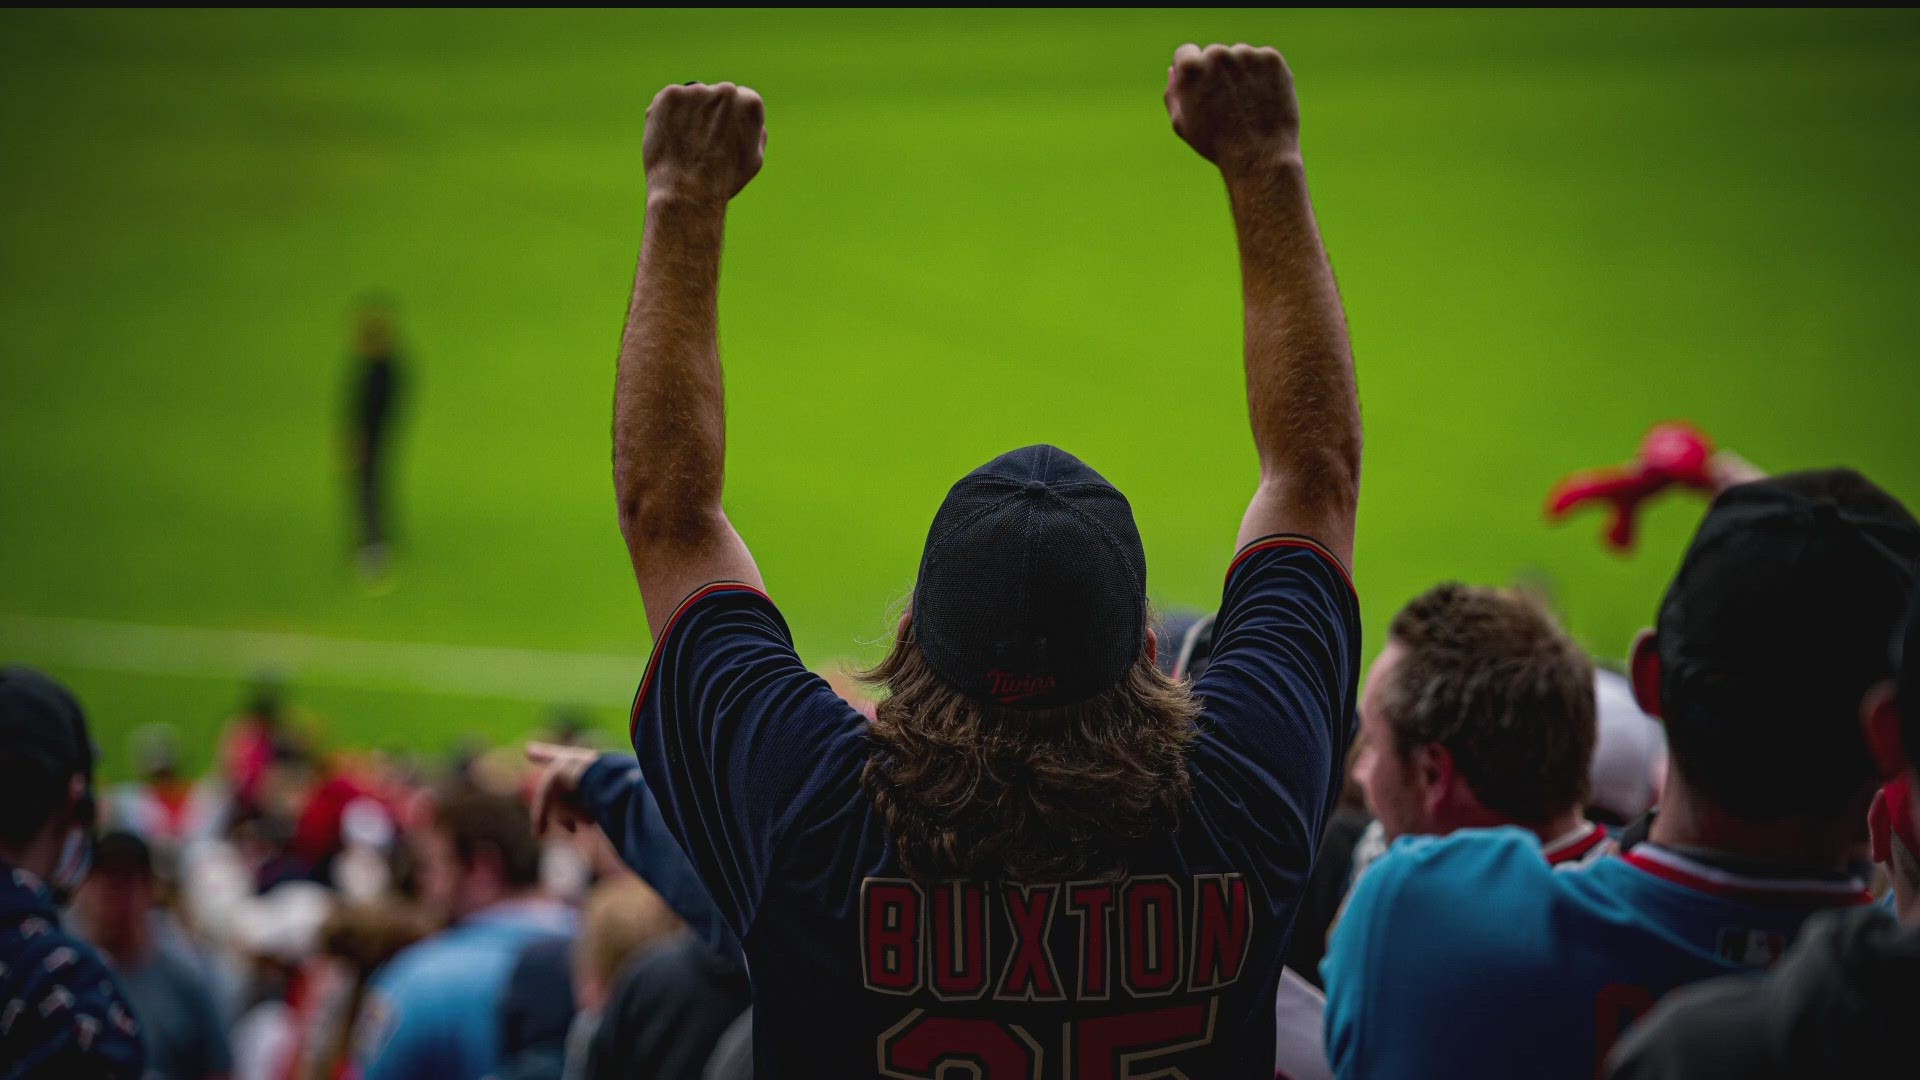 Baseball fans inside Target Field were with the Twins every step of the way Wednesday night as they swept Toronto in Game 2 of the MLB Wild Card Series.